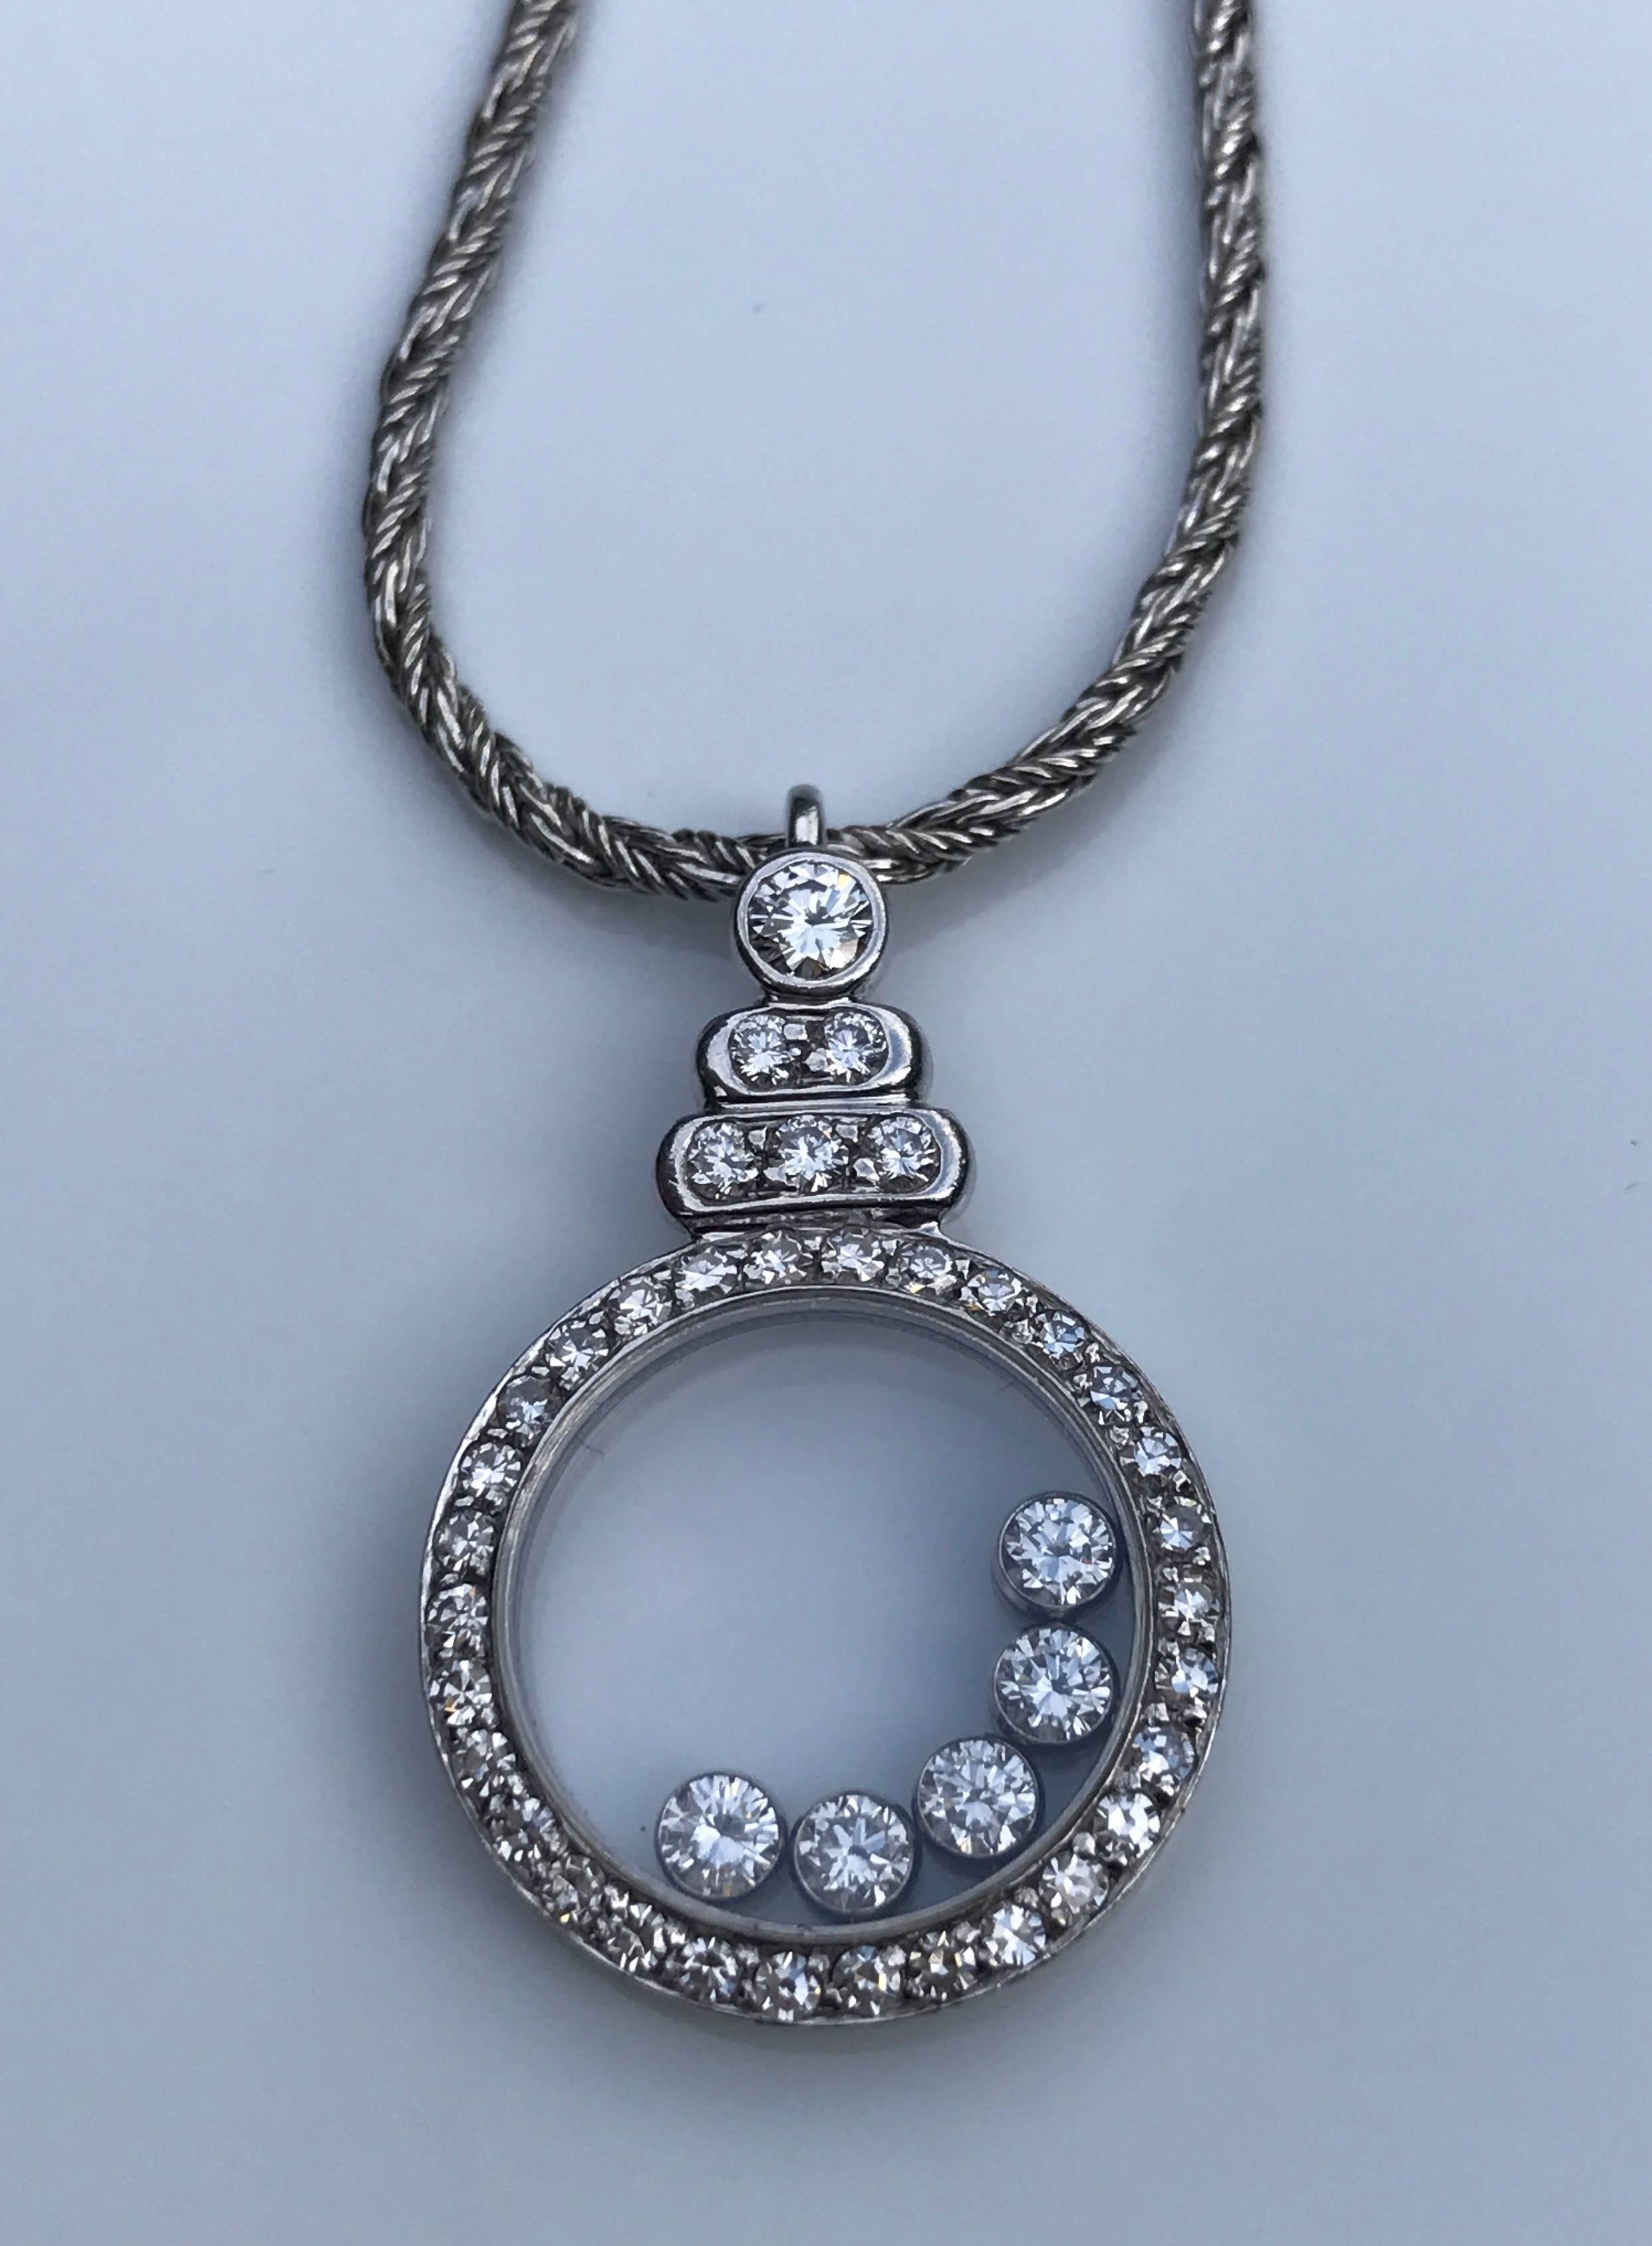 A 1980's Chopard 'Happy Diamonds' corded necklace set in 18k white gold. The necklace features a circular pendant with five free moving brilliant-cut round diamonds with an additional thirty-six diamonds set to the pendant edge and above the